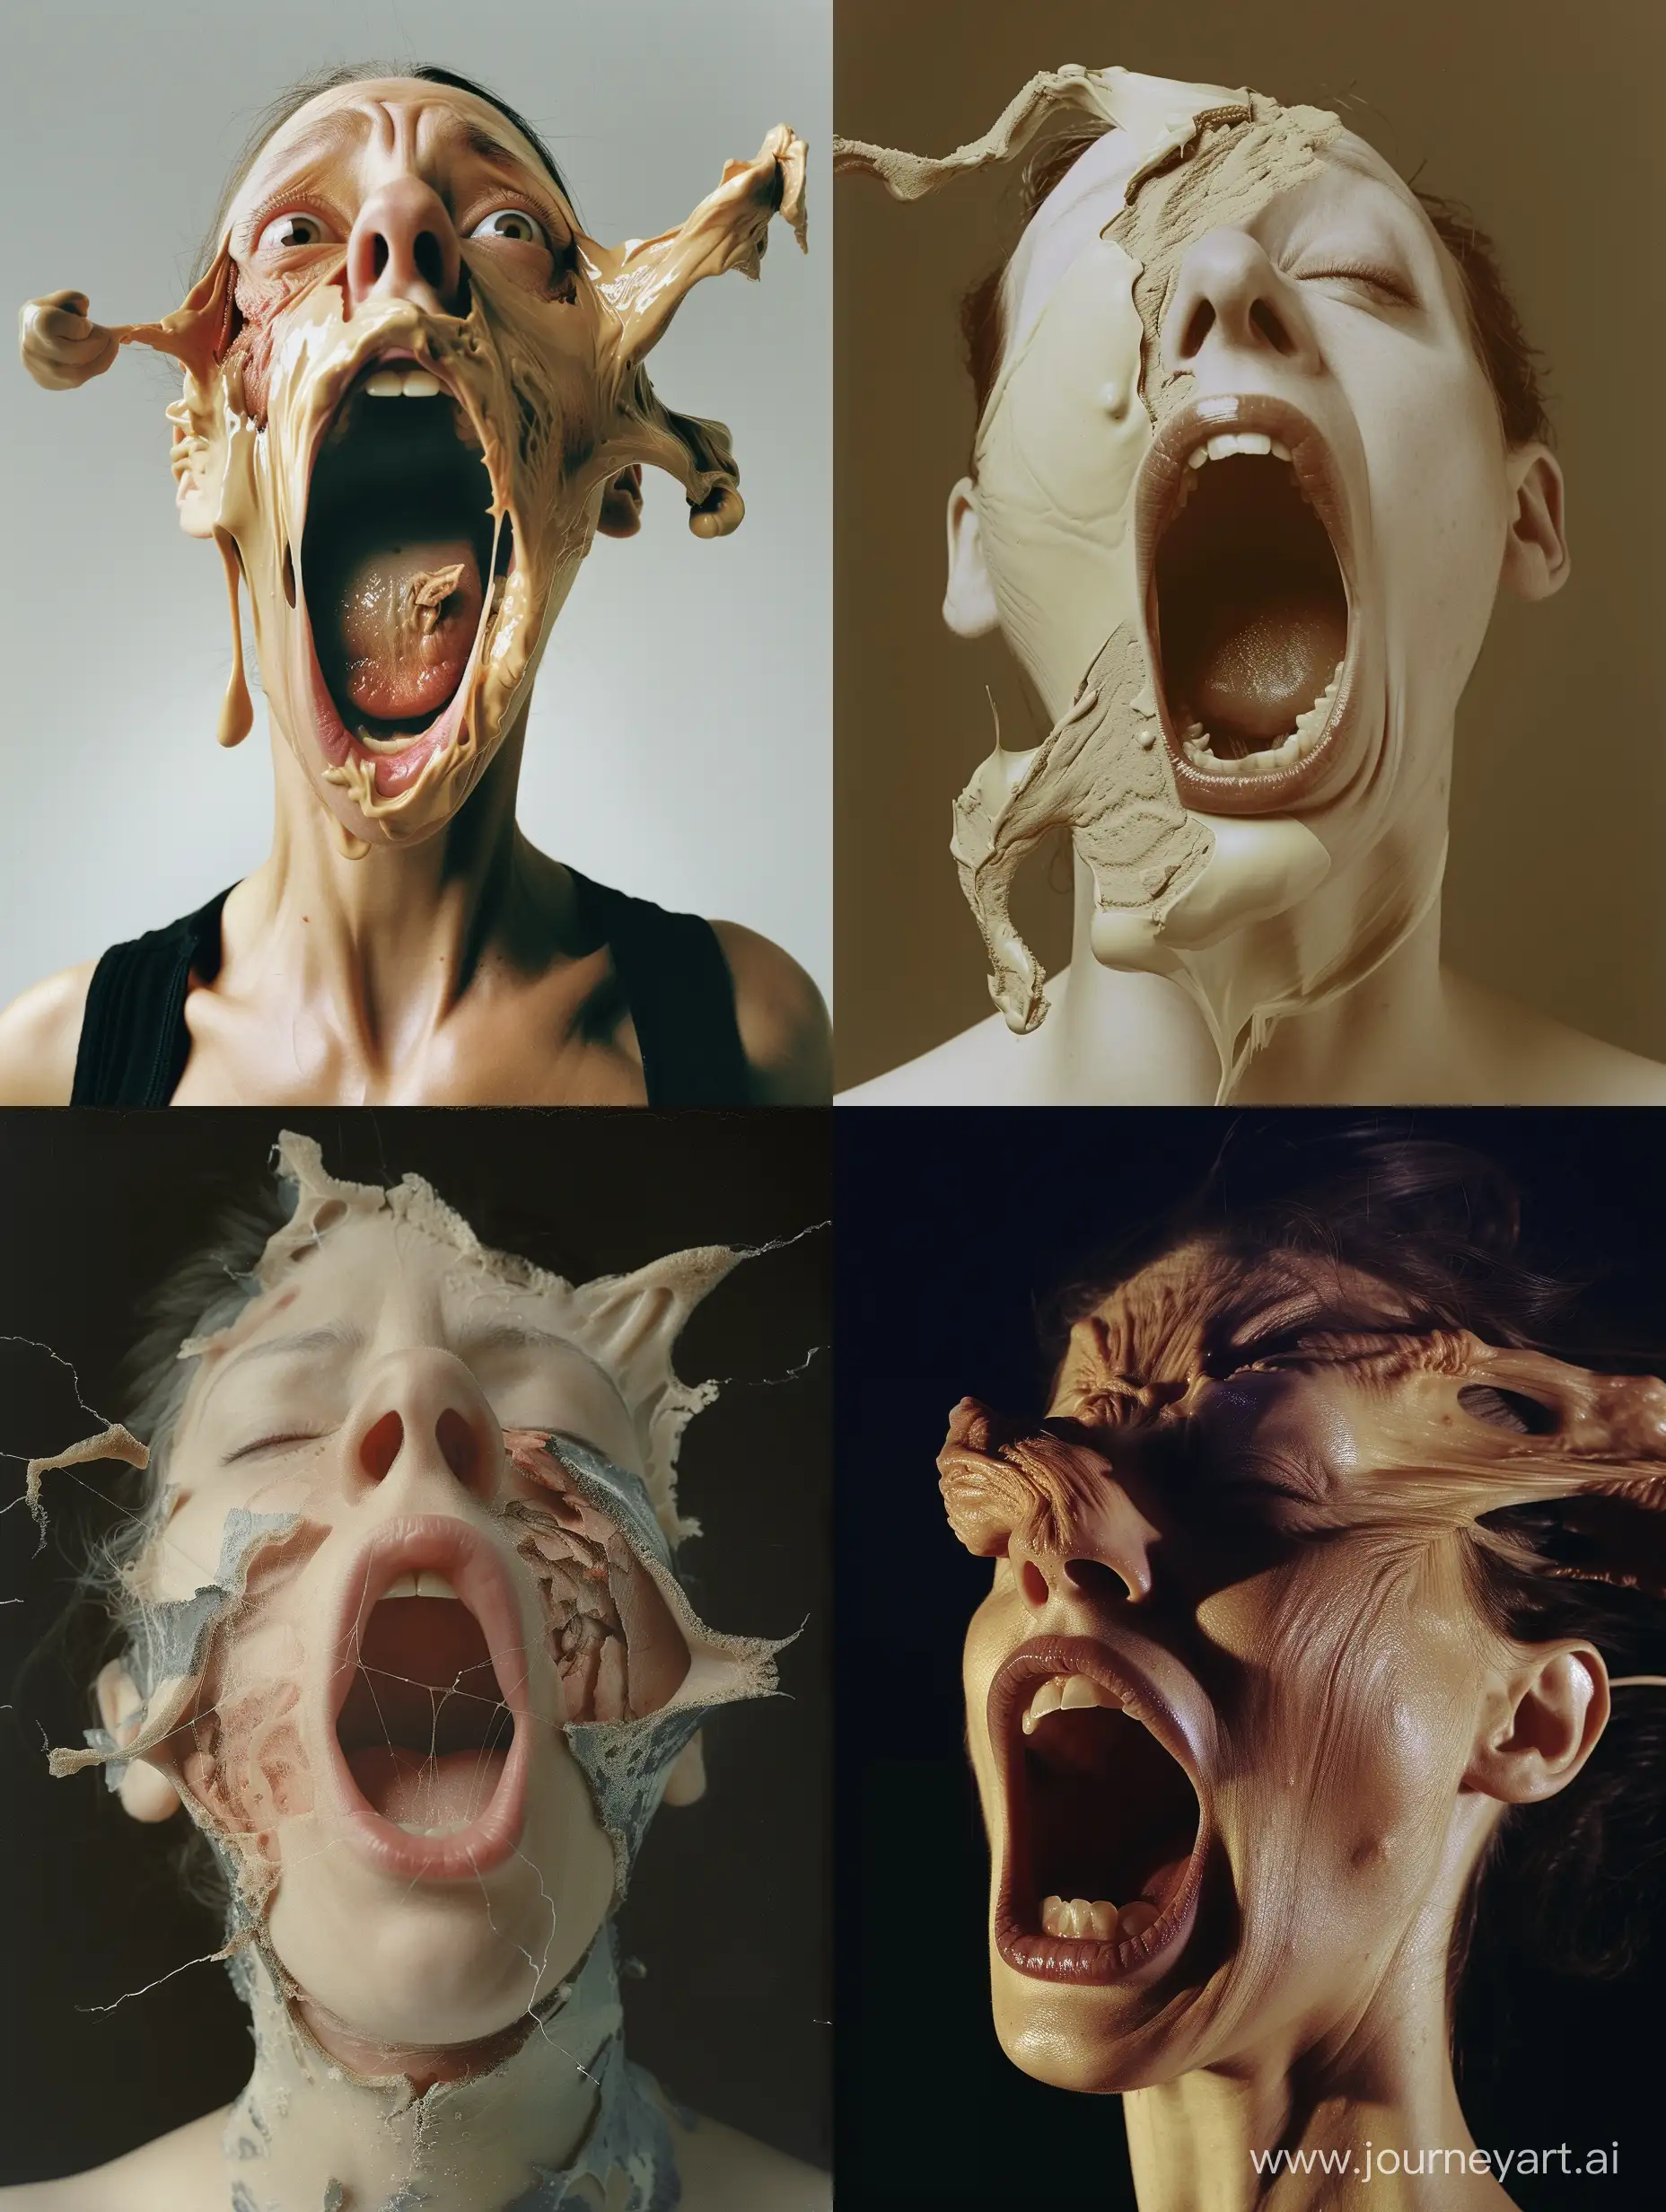 Color photo of a woman with an open mouth, her face appearing as if it's melting, with certain areas stretched thin and seemingly on the verge of tearing. Despite the distorted features, her femininity remains discernible. The abnormally large mouth, pulled apart and elongated from the corners, adds an unsettling touch to the overall image. Capture the surreal and captivating essence of this transformation, where the boundaries of human form blur and transcend, taken on provia